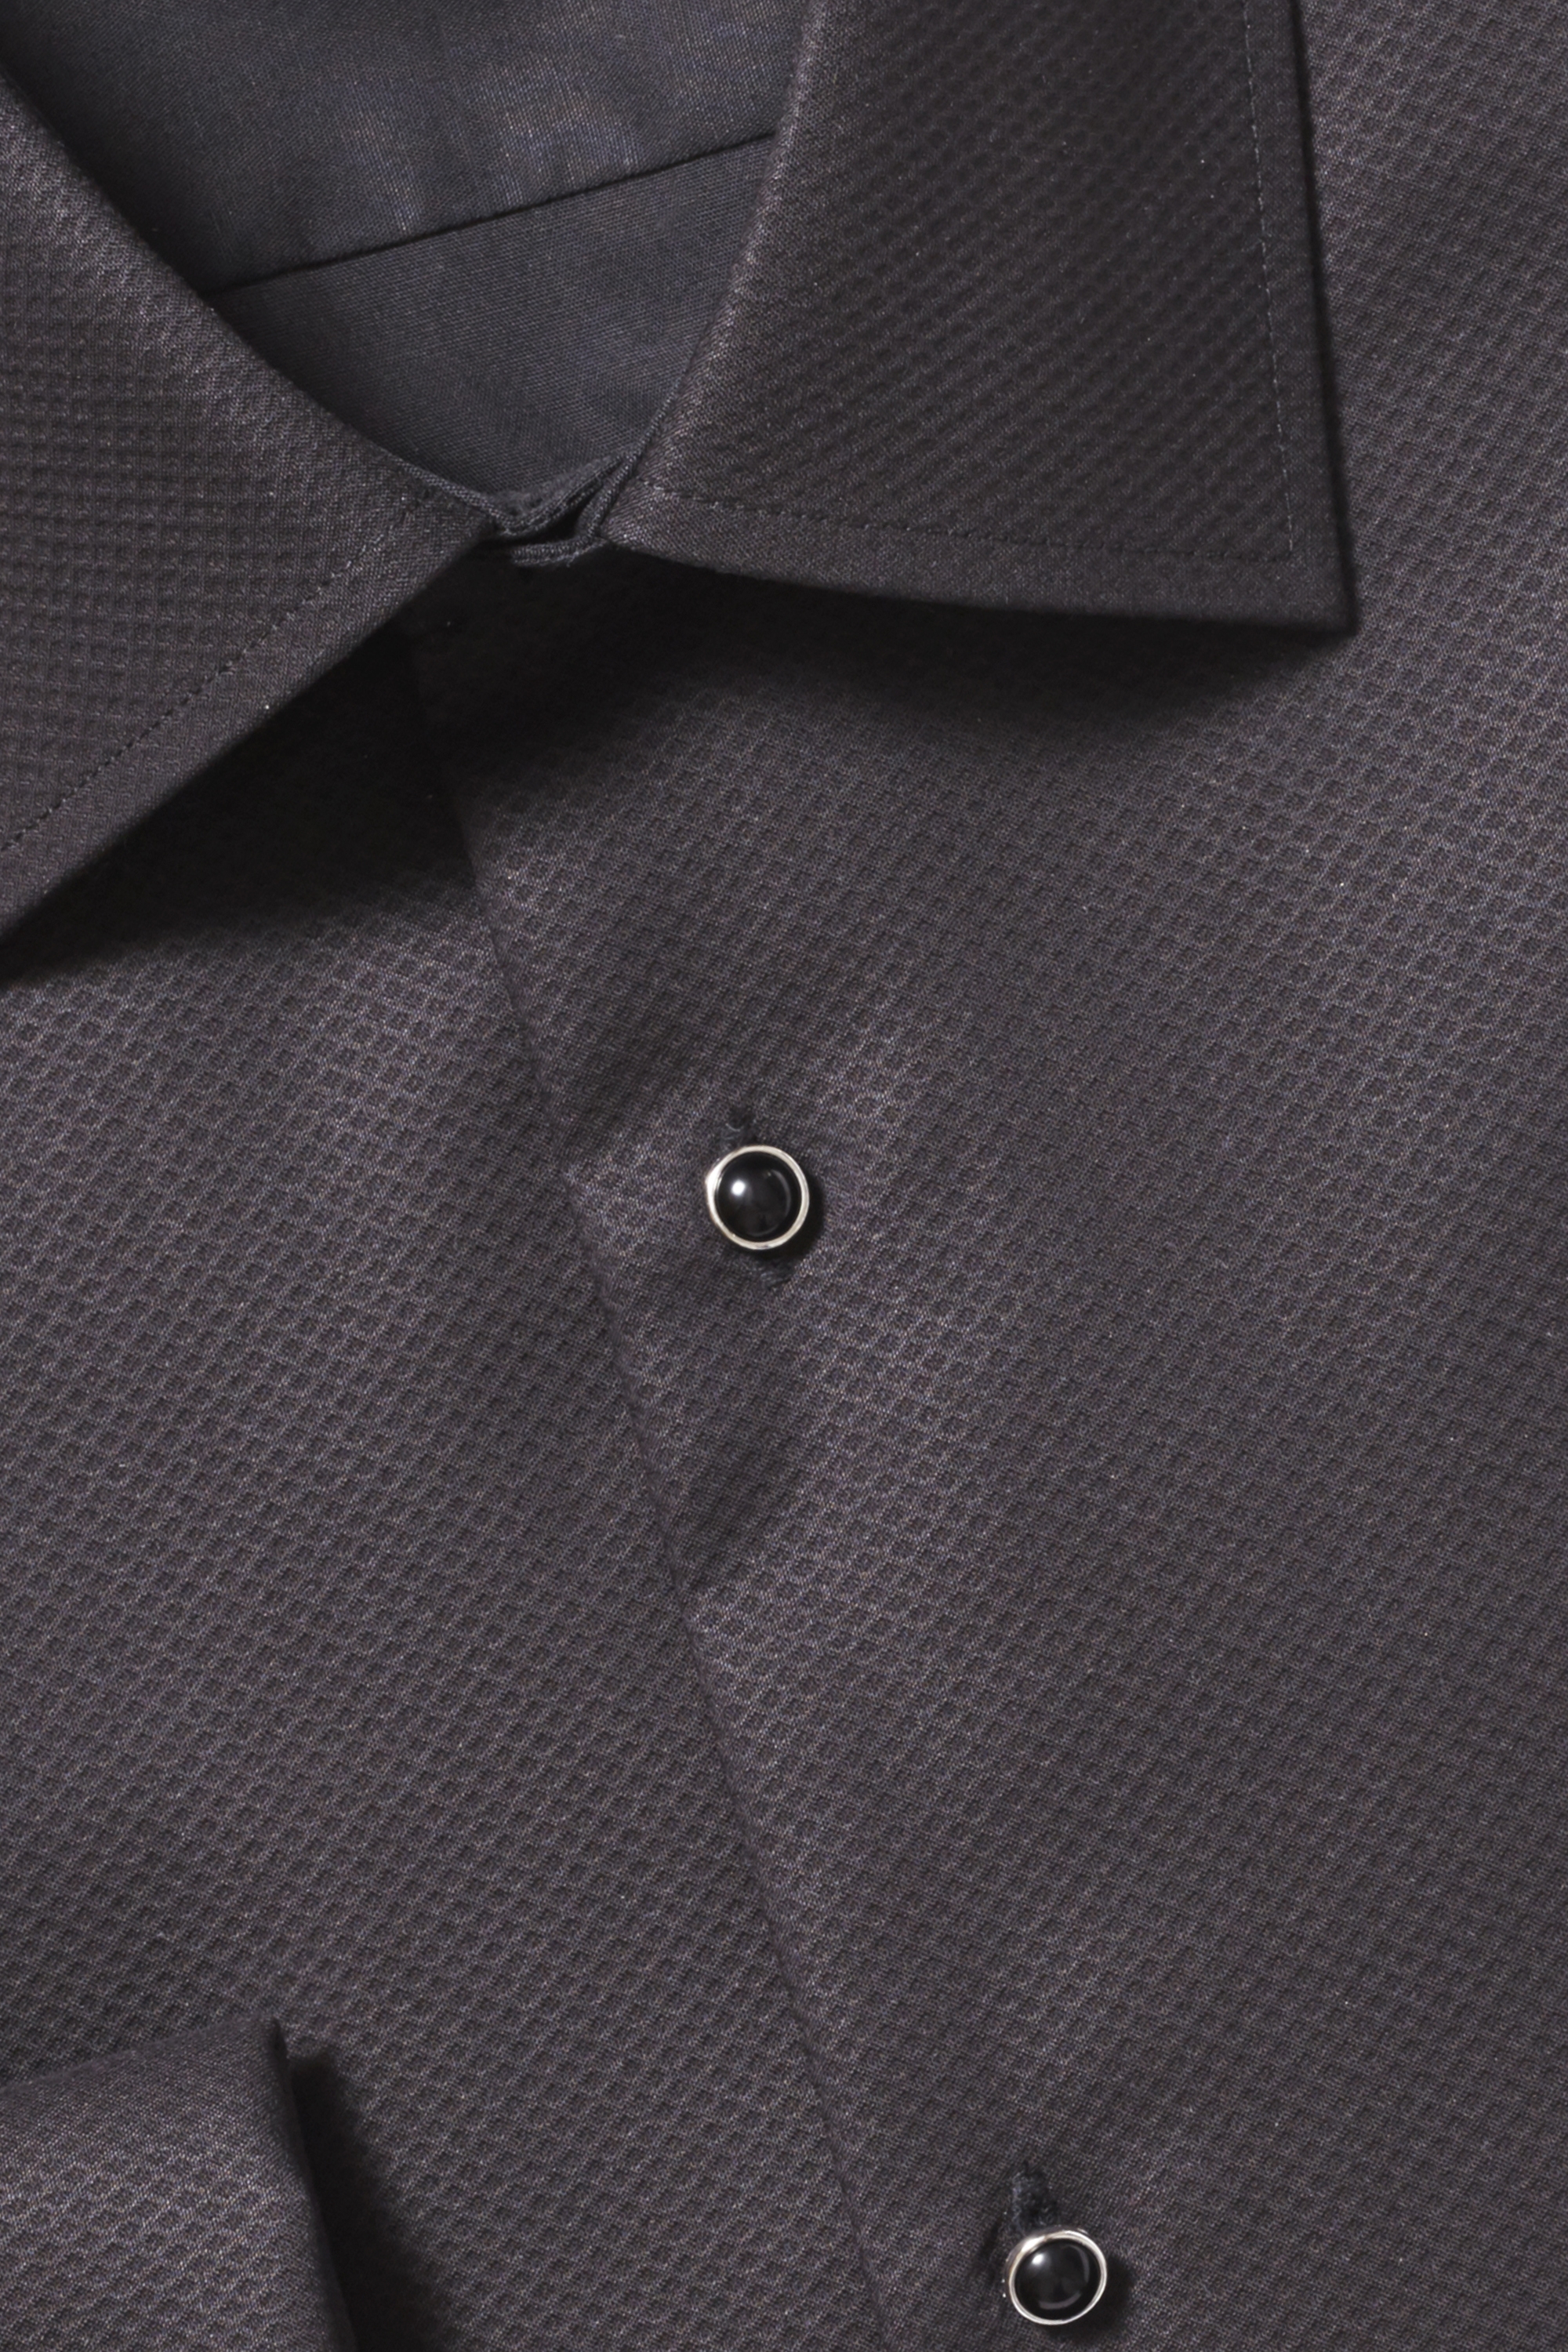 Tailored Fit Black Marcella Dress Shirt | Buy Online at Moss